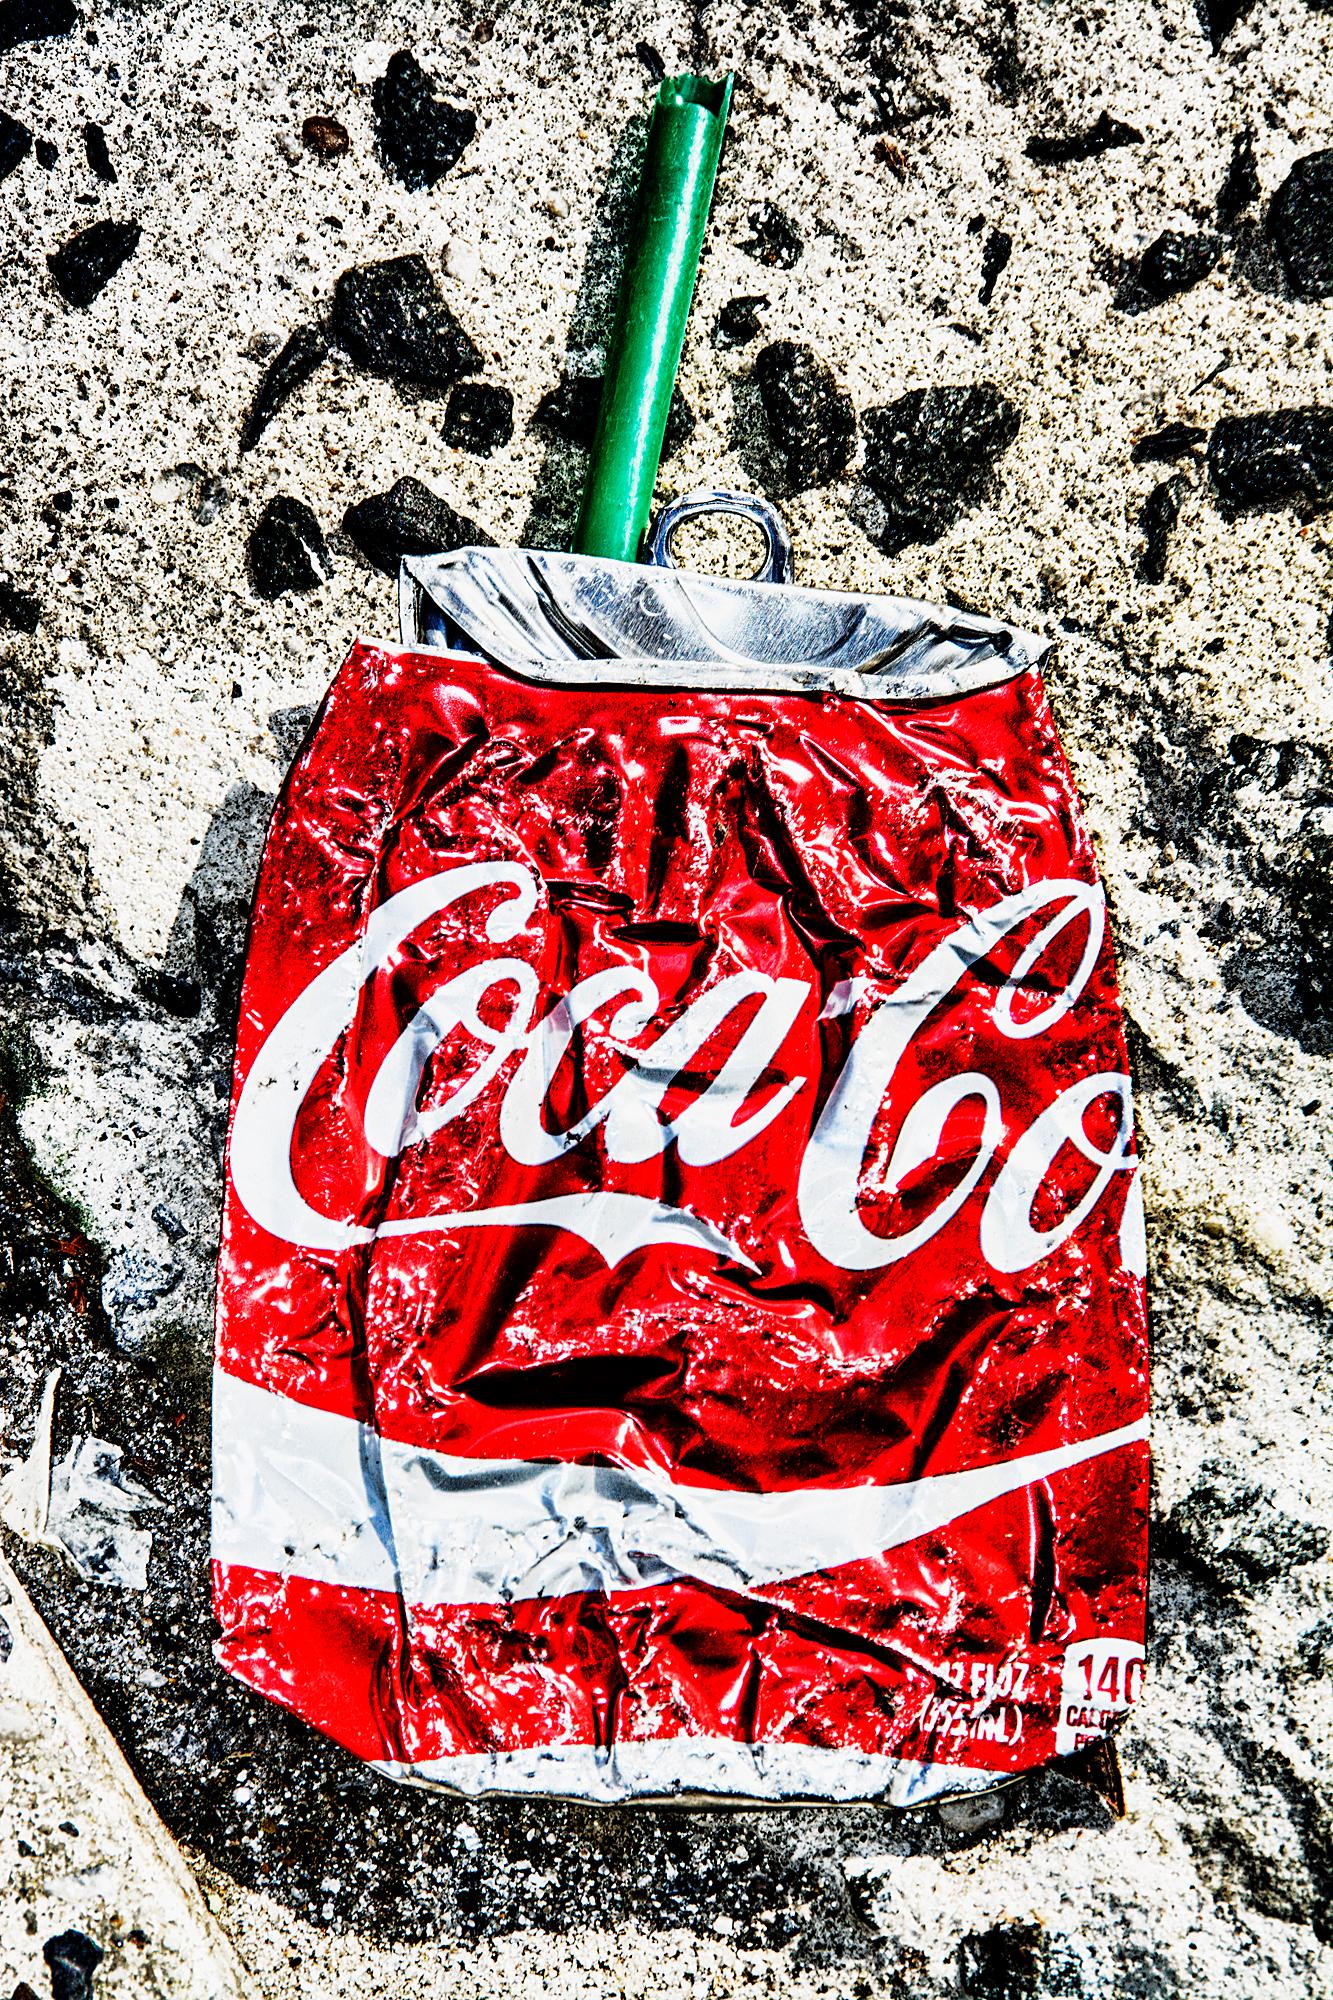 Mitchell Funk Abstract Photograph - Crushed Coke Can Street Asphalt - Real Life Street Art